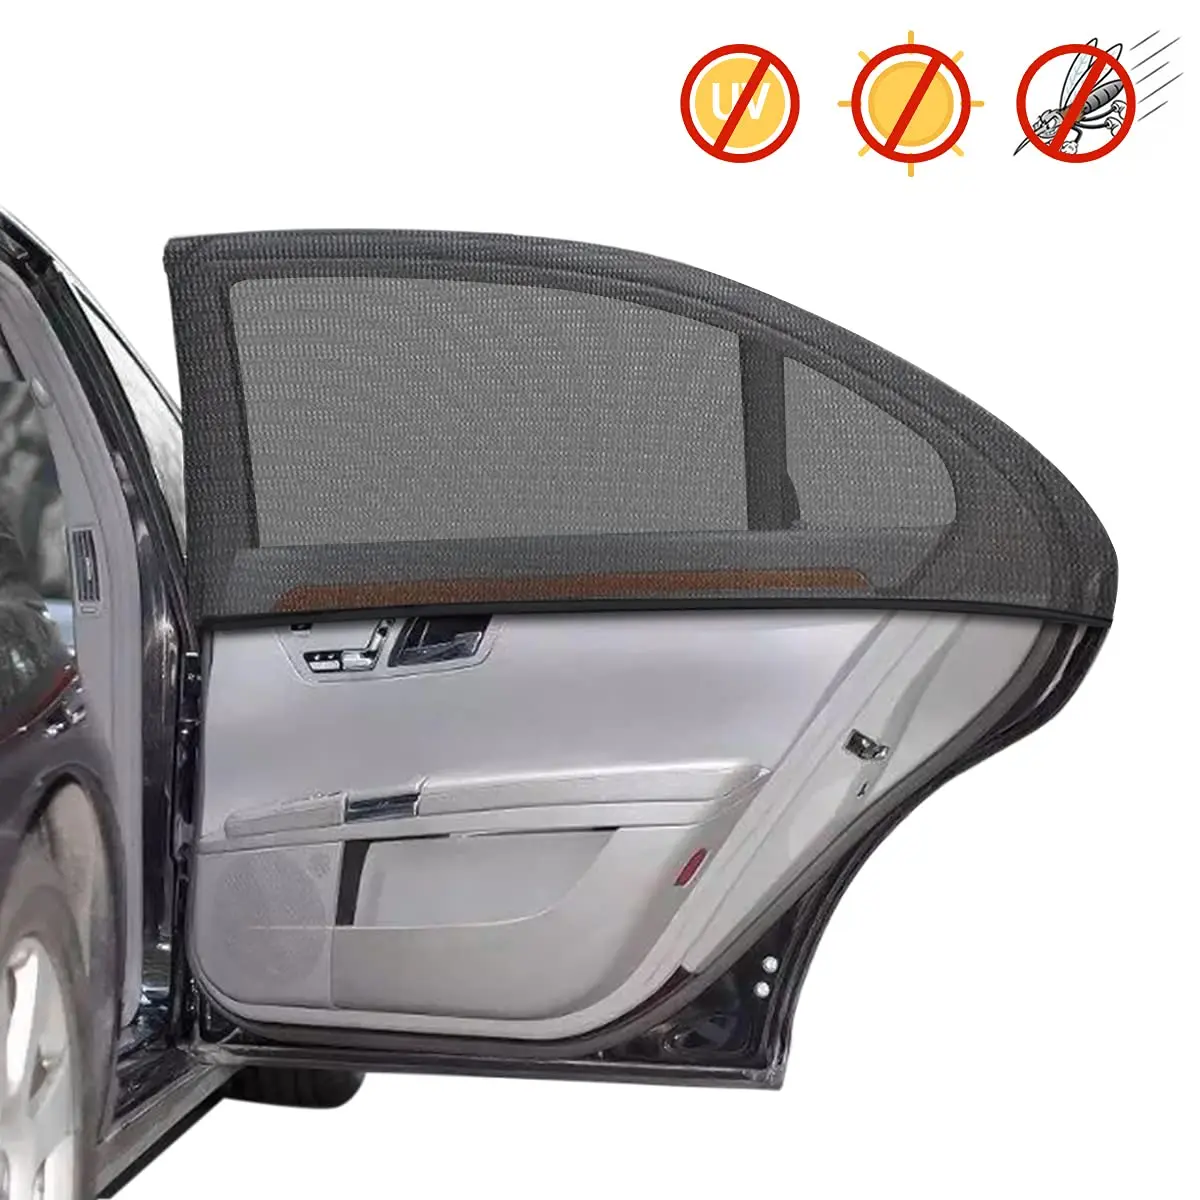 

Universal Car Back Window Shade 2 Pack Car Side Window Sunshade UV Rays And Privacy Protection Baby Car Shades For Side Window